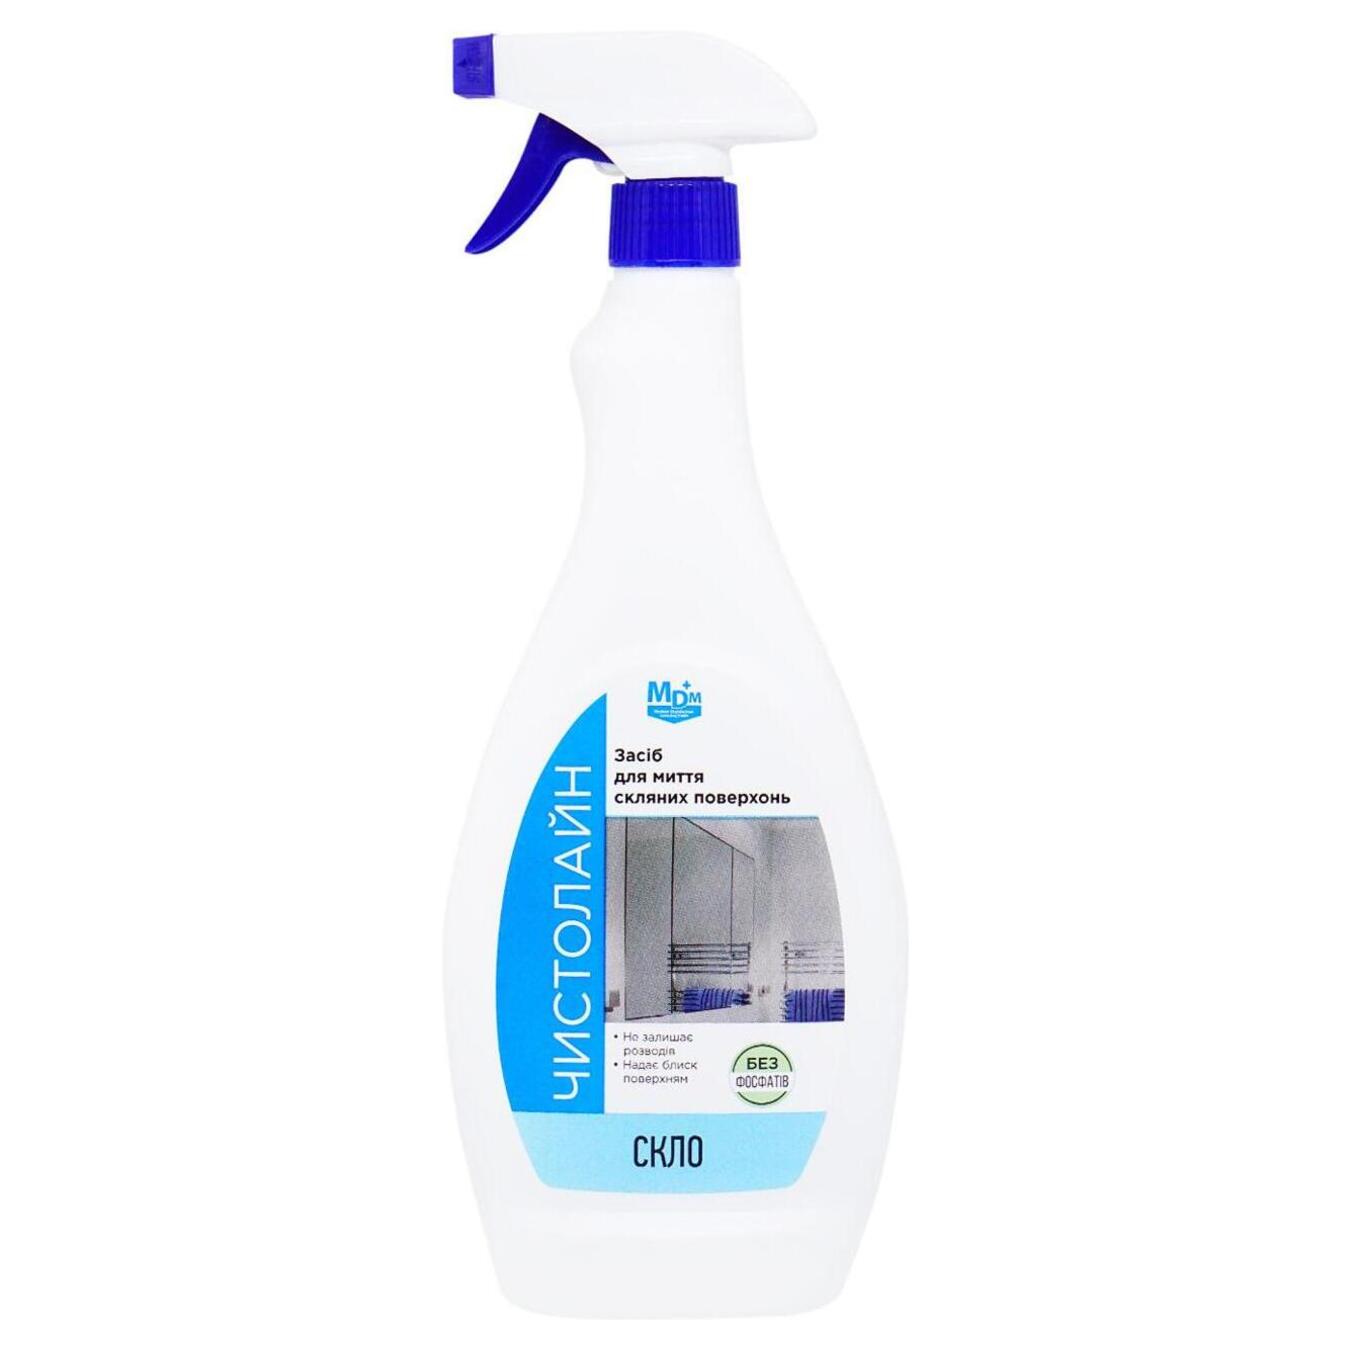 Cleaning agent Chistolain Glass for glass surfaces 750ml